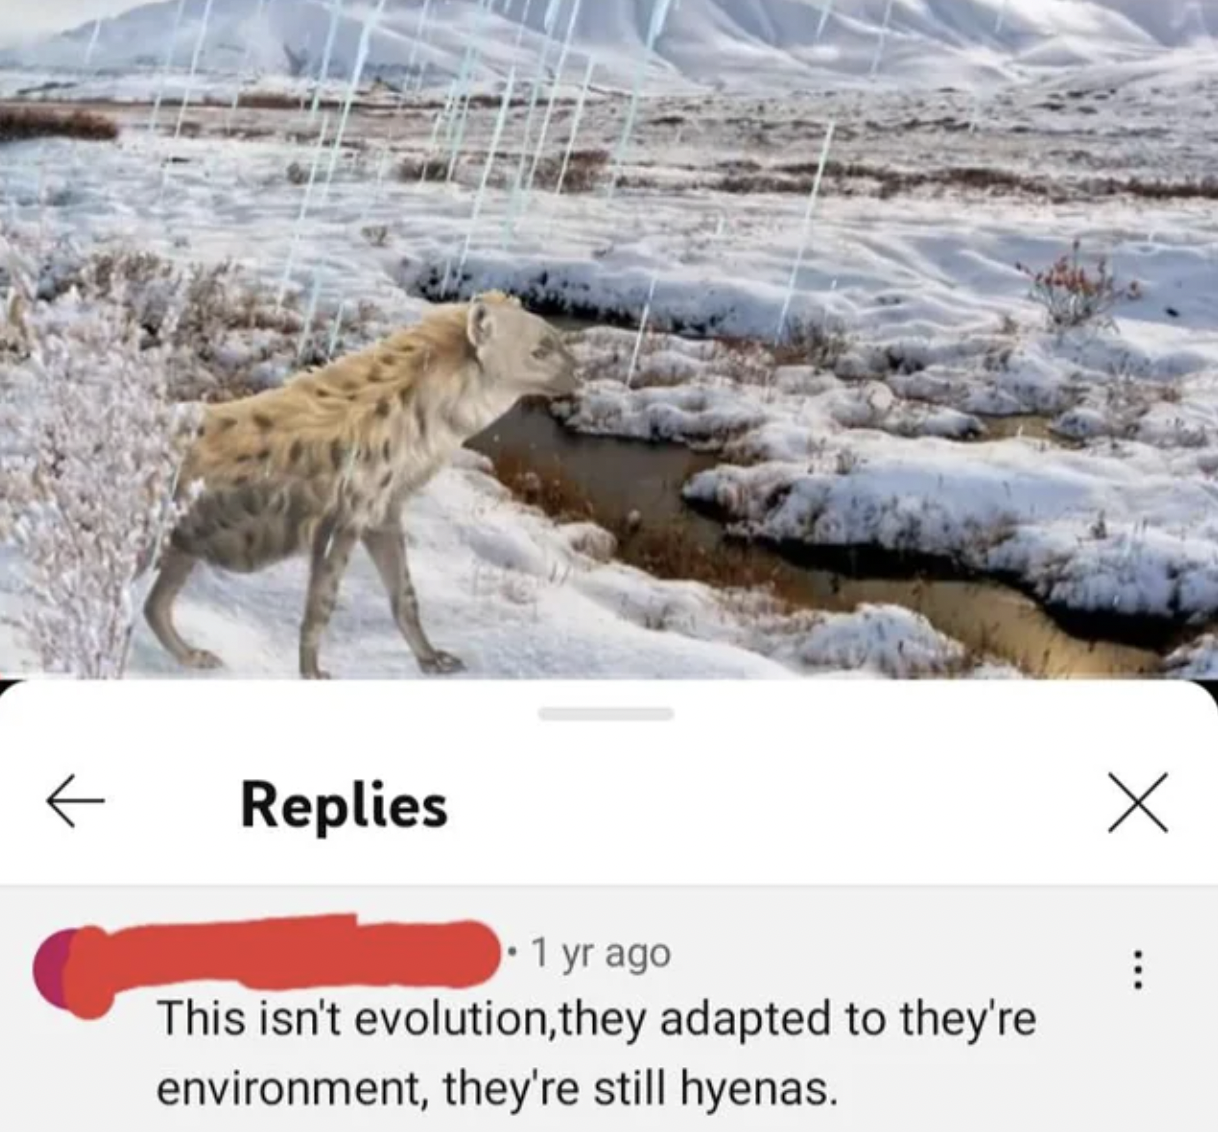 arctic tundra - This isn't evolution, they adapted to they're environment, they're still hyenas.